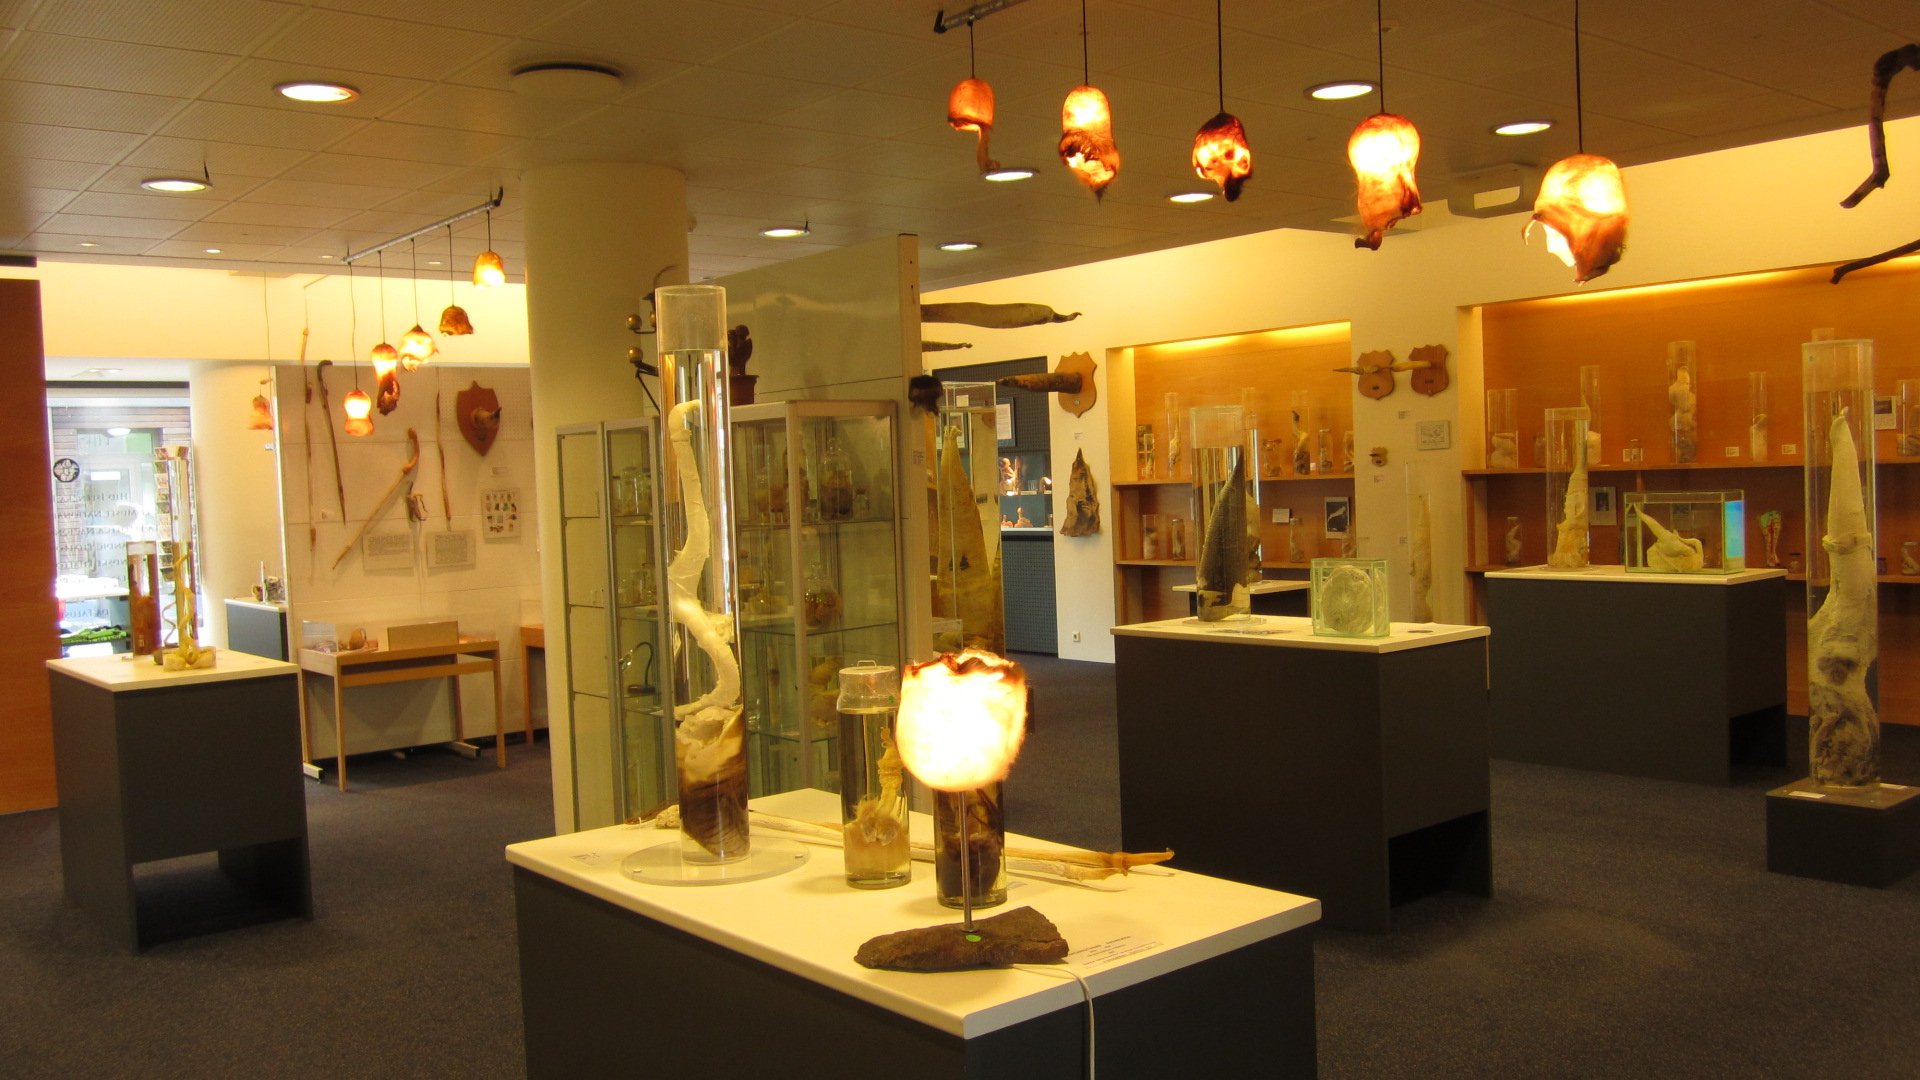 Icelandic Phallological Museum is home to more than 215 individual sex organs from various creatures that live on both the land and in the sea.